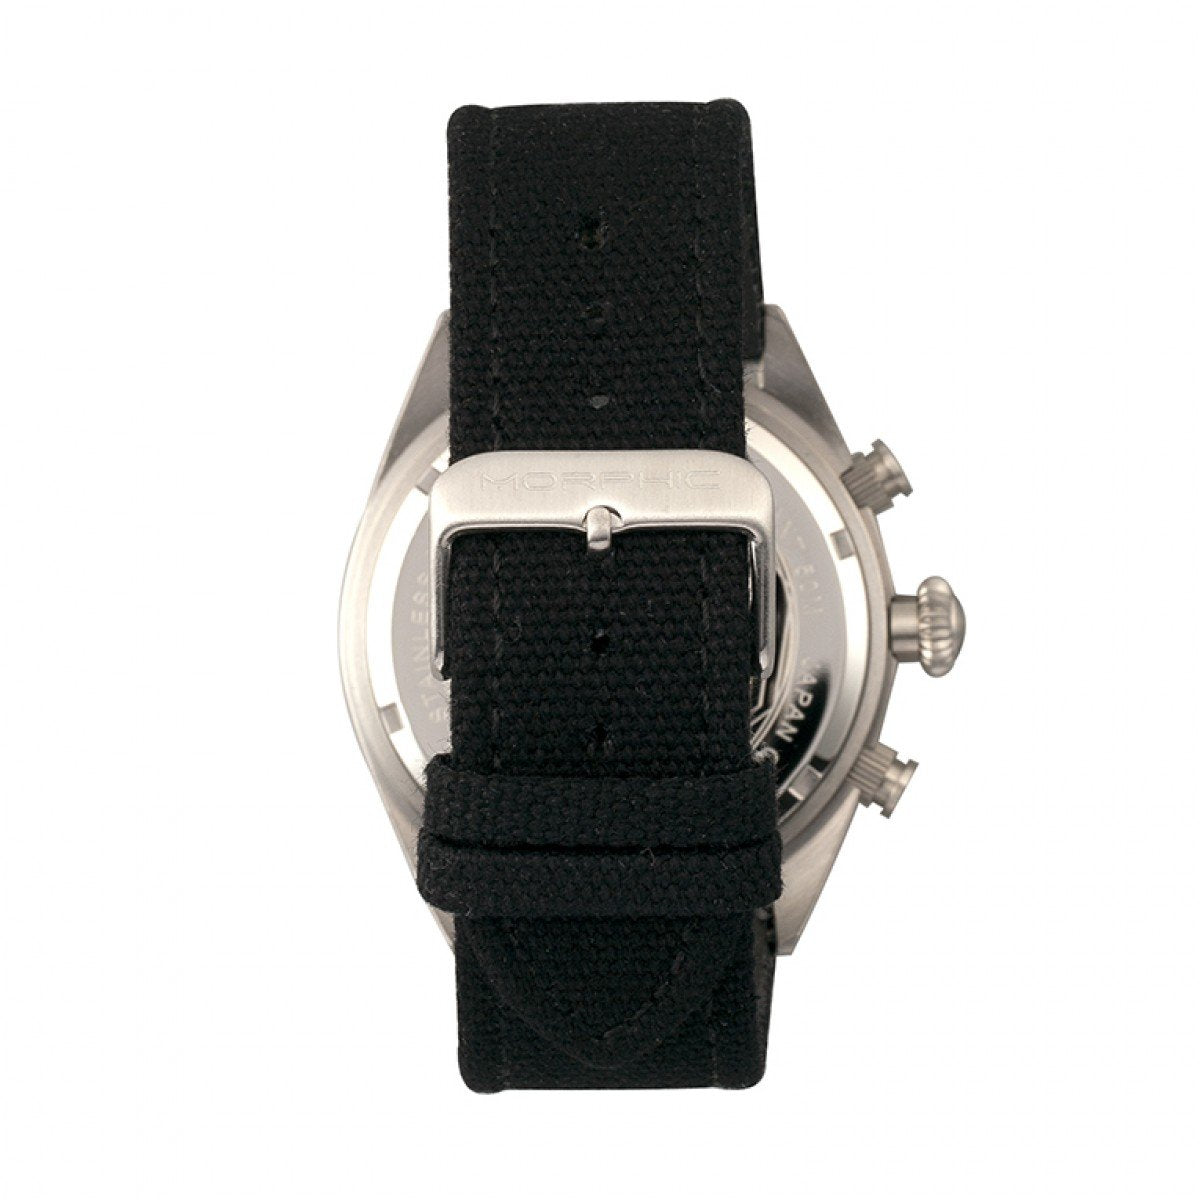 Morphic M53 Series Chronograph Fiber-Weaved Leather-Band Watch w/Date - Silver/Black - MPH5301